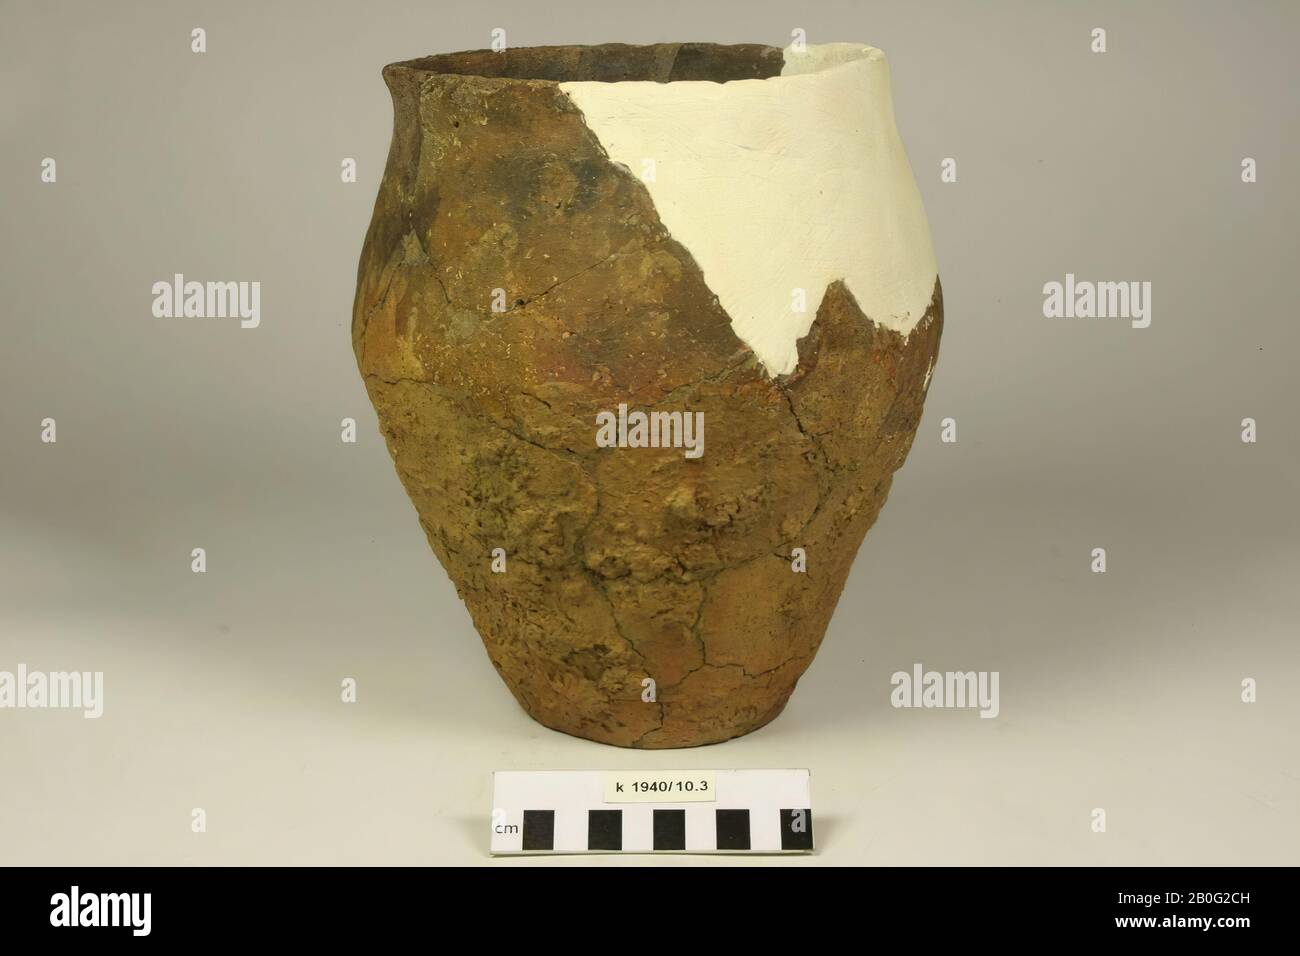 Slender urn of earthenware with smooth neck and roughly infected belly, provided with a serrated edge. Many glues and additions., Urn, earthenware, h: 23.2 cm, diam: 21.2 cm, prehistory -800 Stock Photo